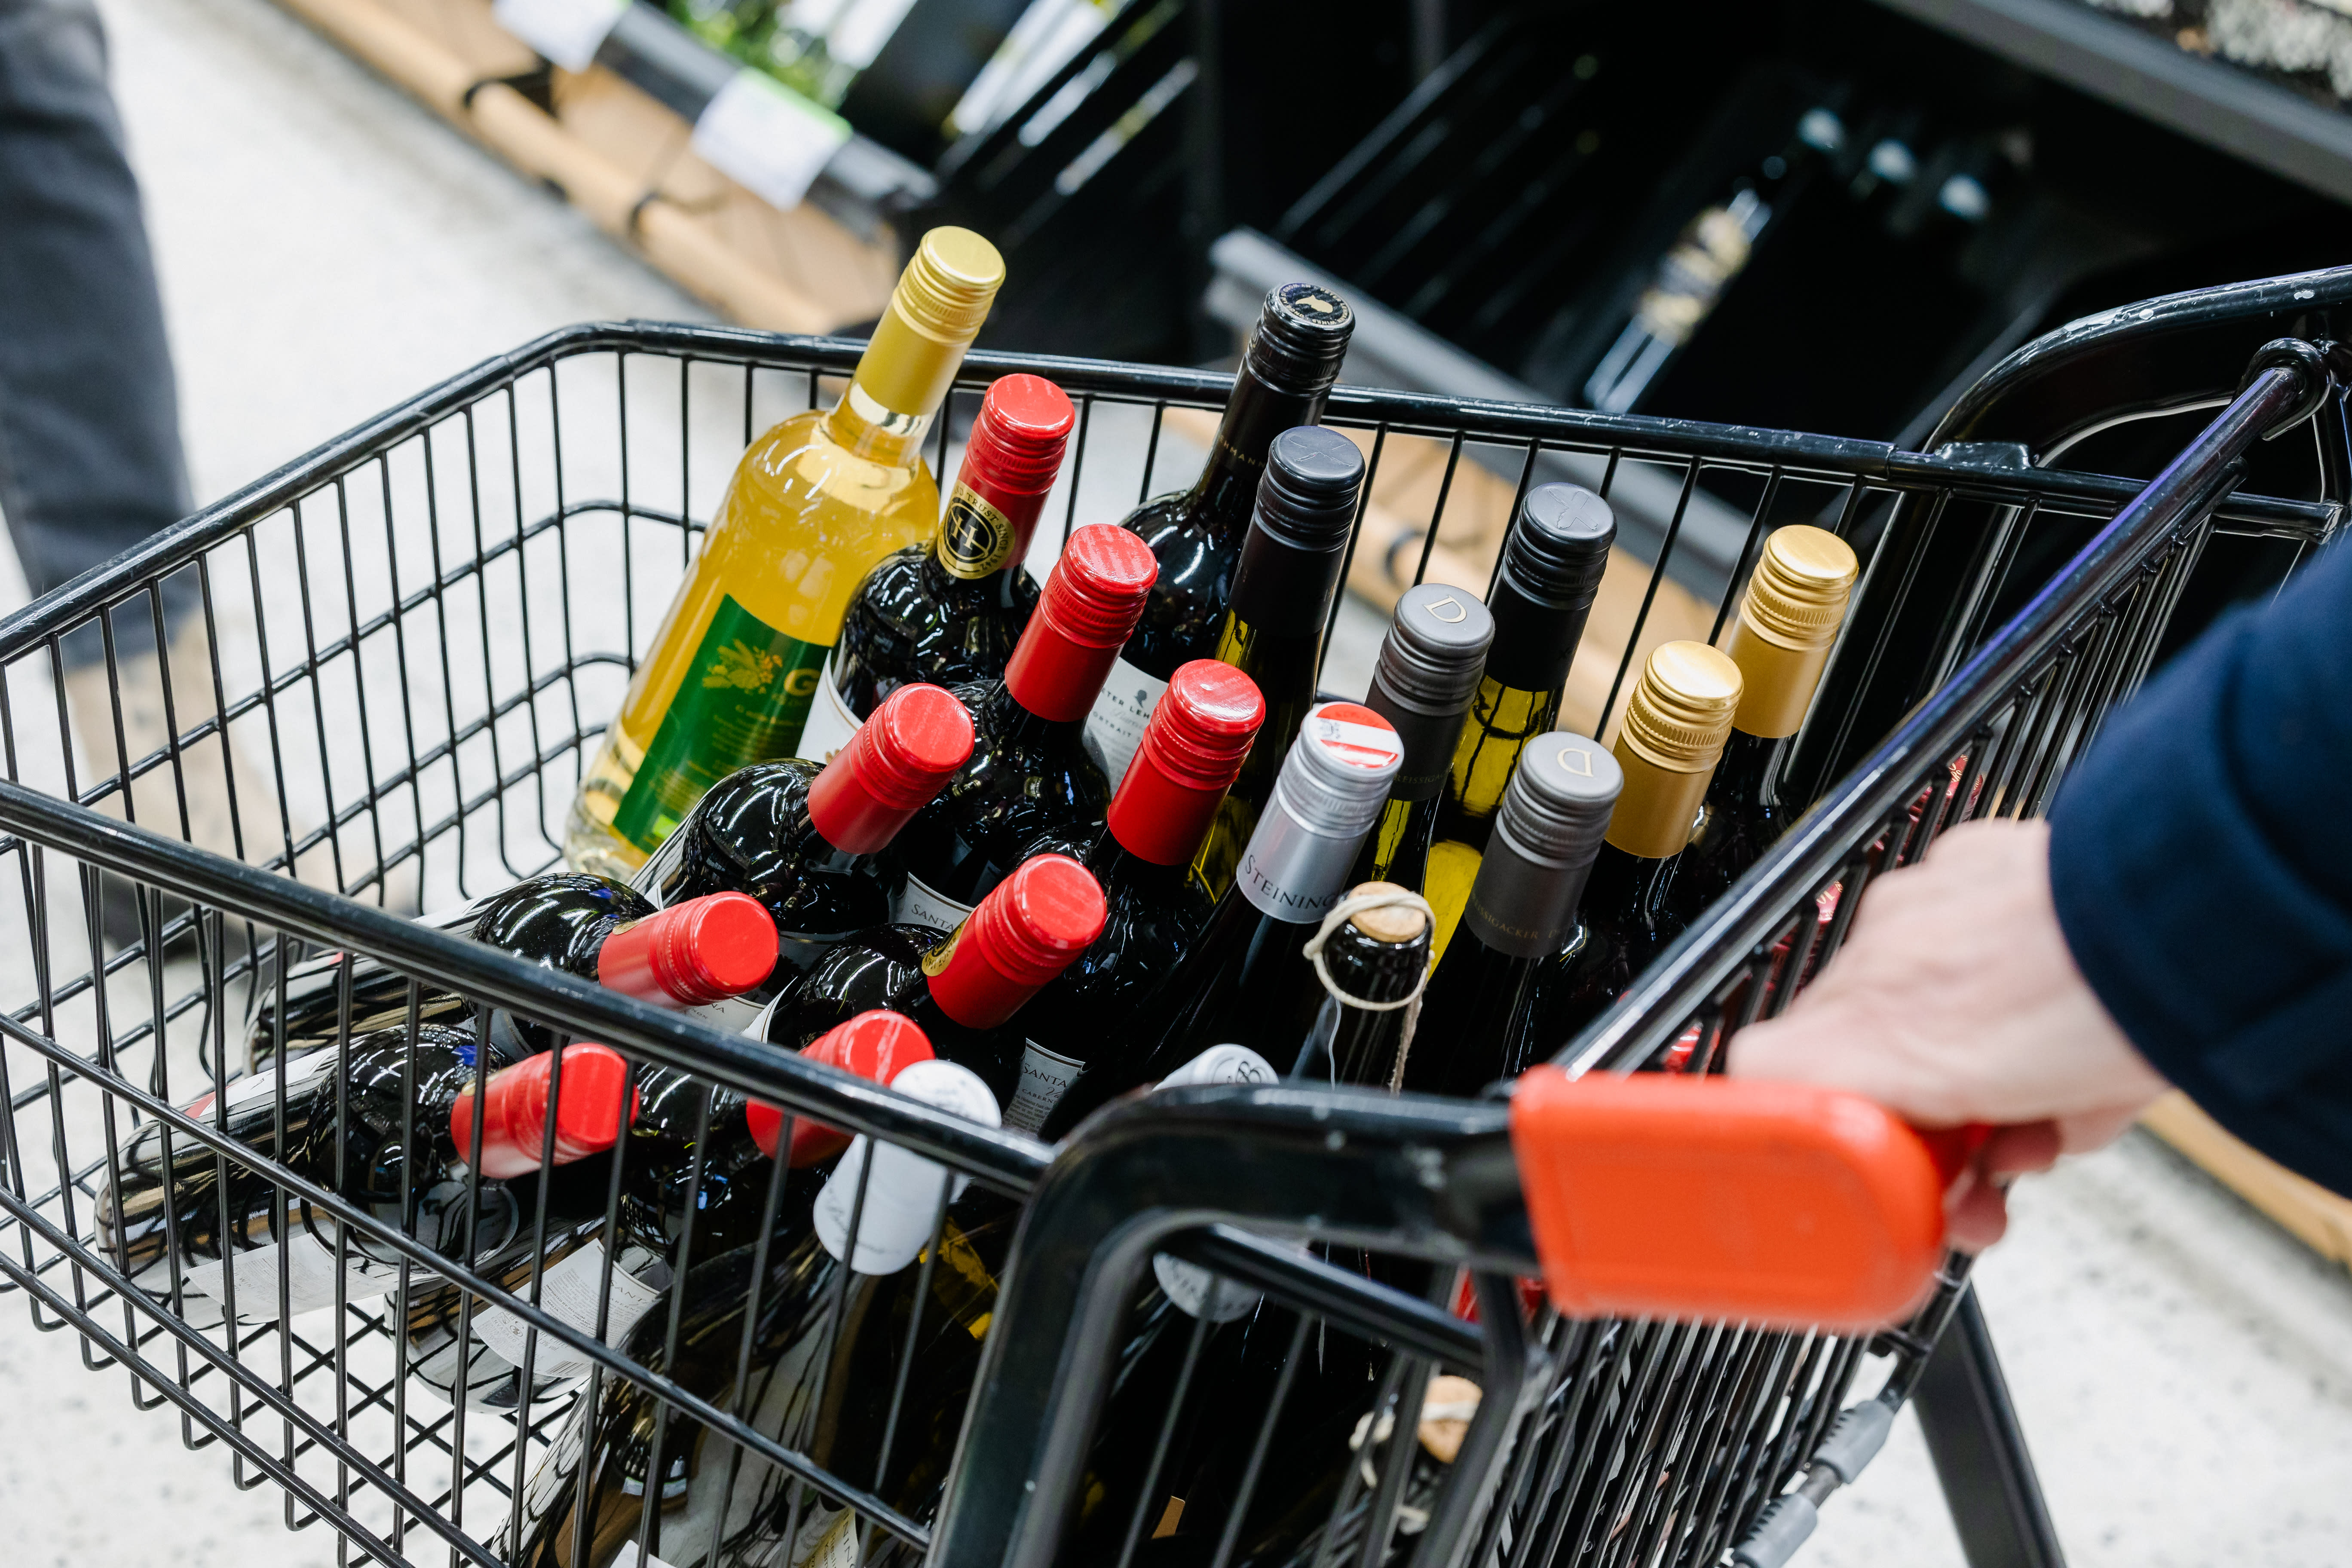 The majority of Finnish MPs support the fact that grocery stores are allowed to sell wine